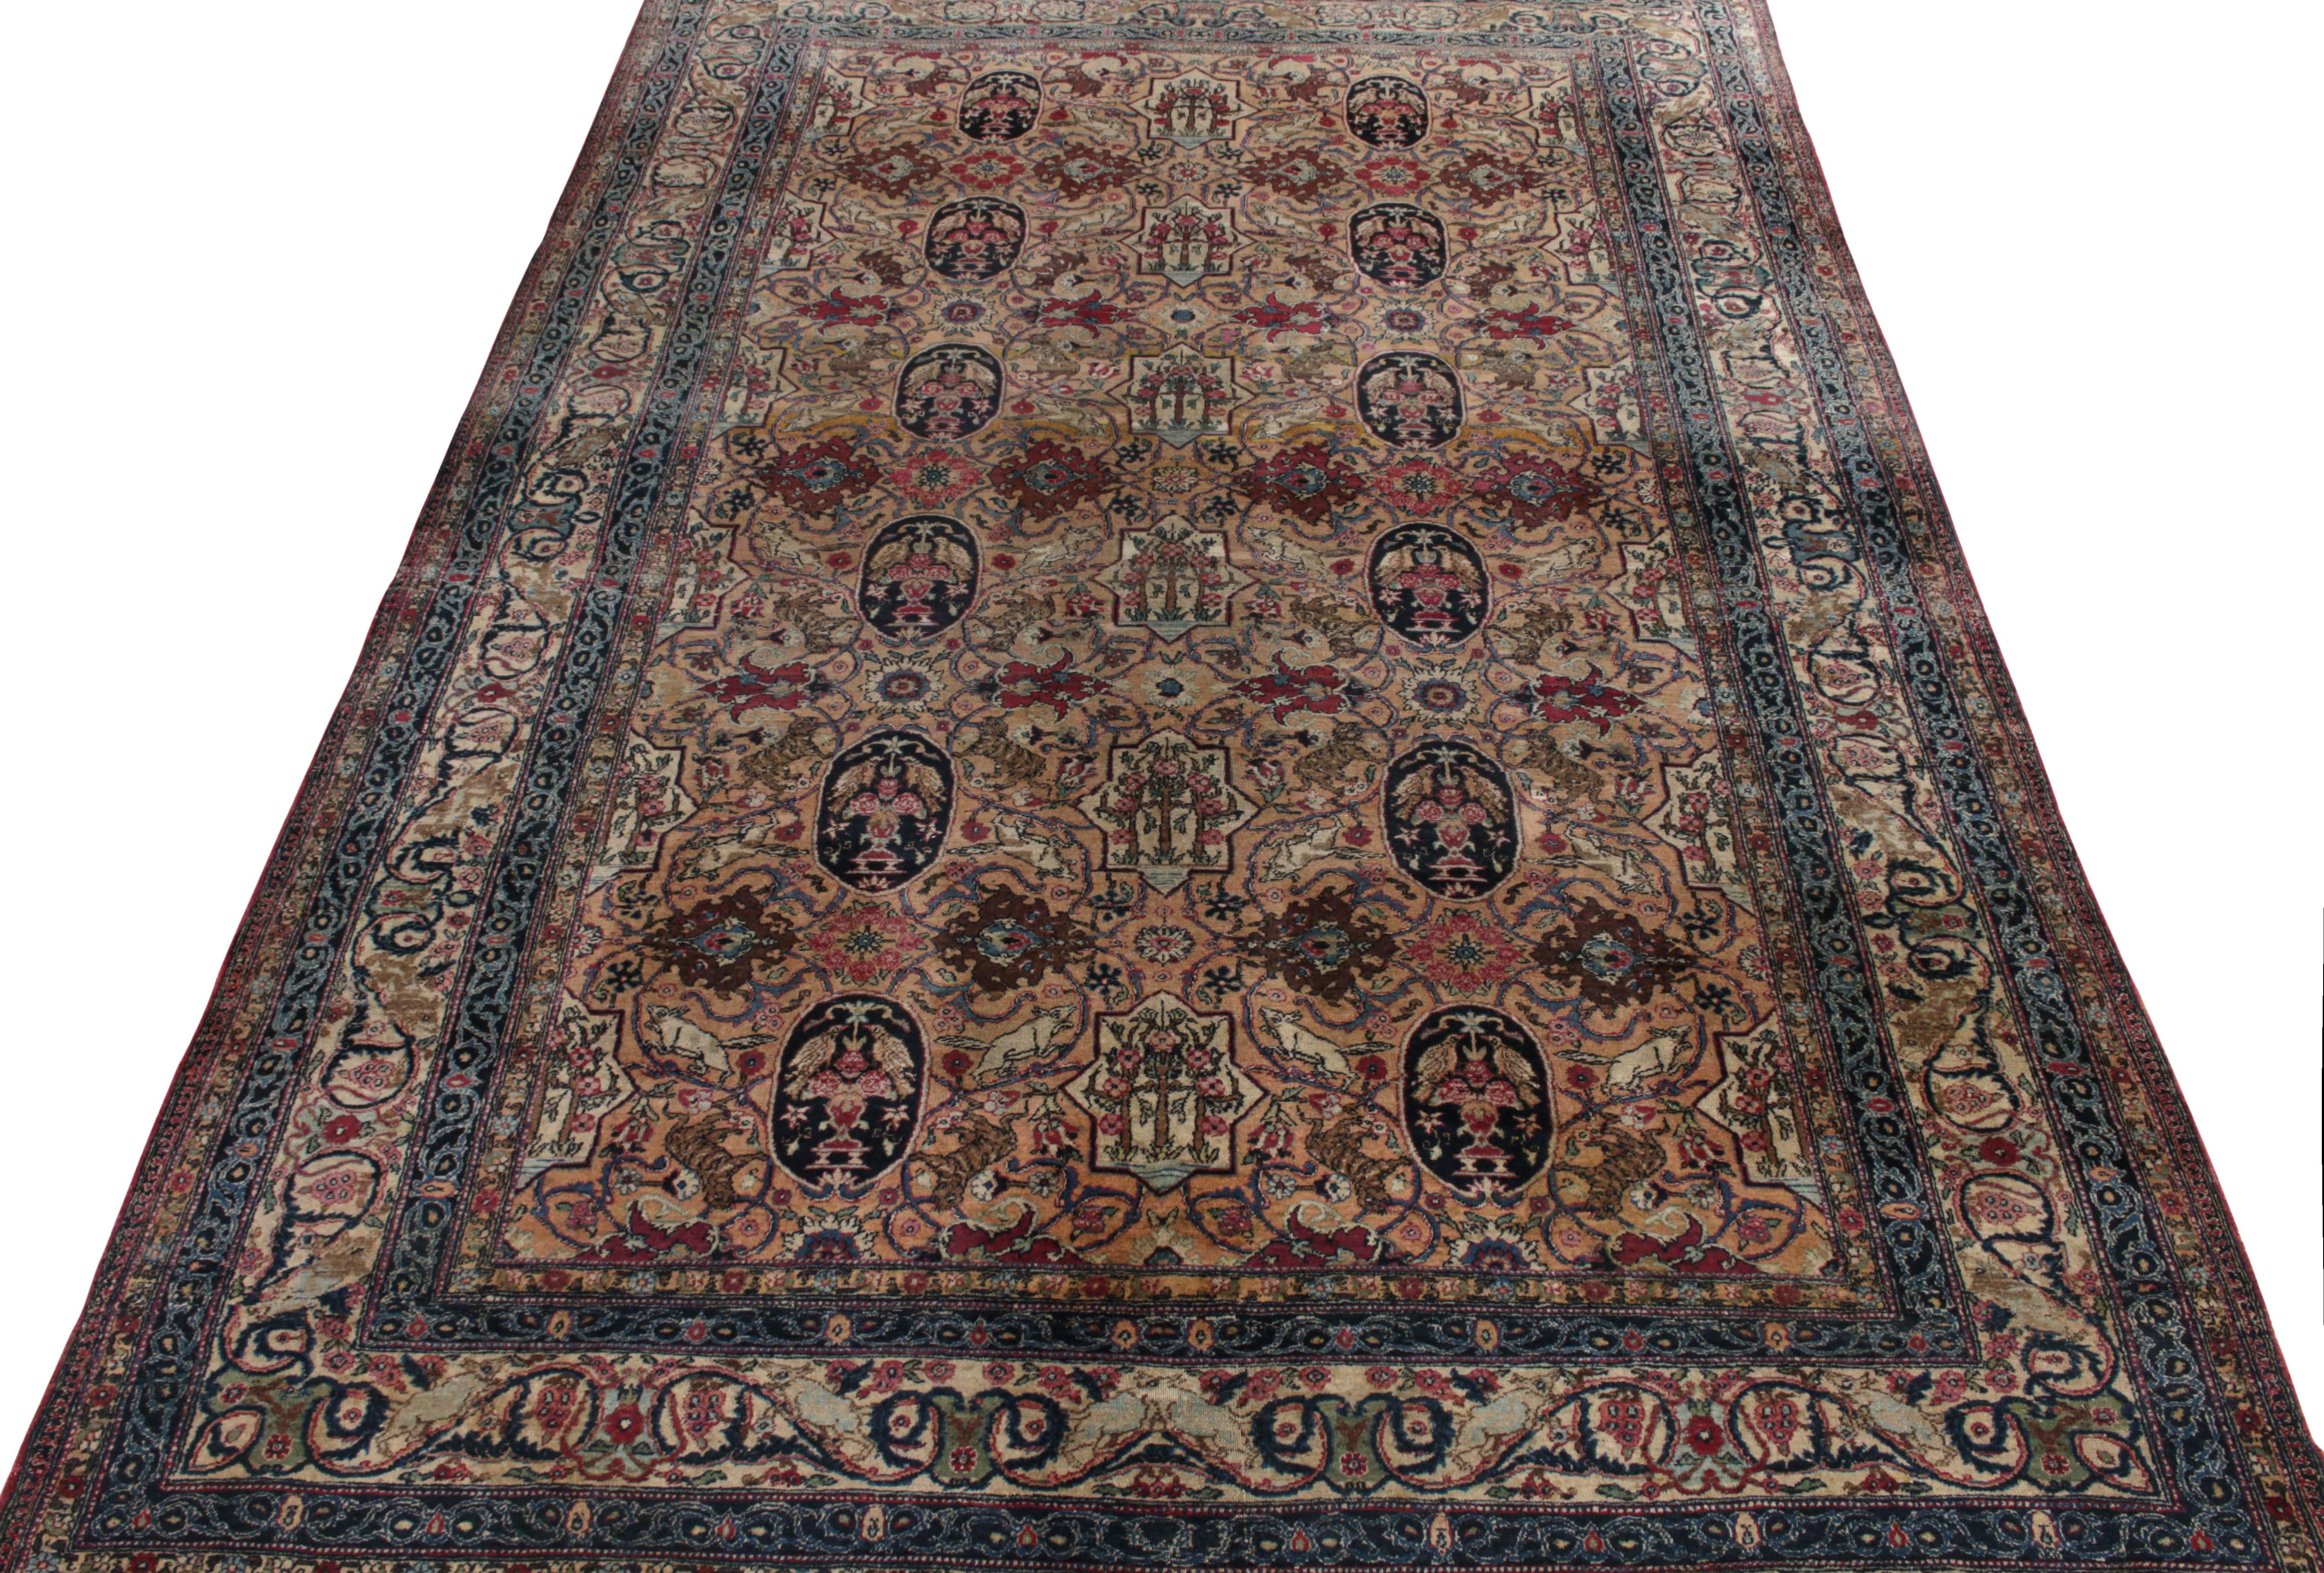 Hand-knotted in wool, a 7x11 antique Persian rug from Tehran showcasing fine craftsmanship of the 1920s with royal blue, beige & wine colored florals juxtaposed by tones of gold, olive green and sky blue on field & border alike—further nestling